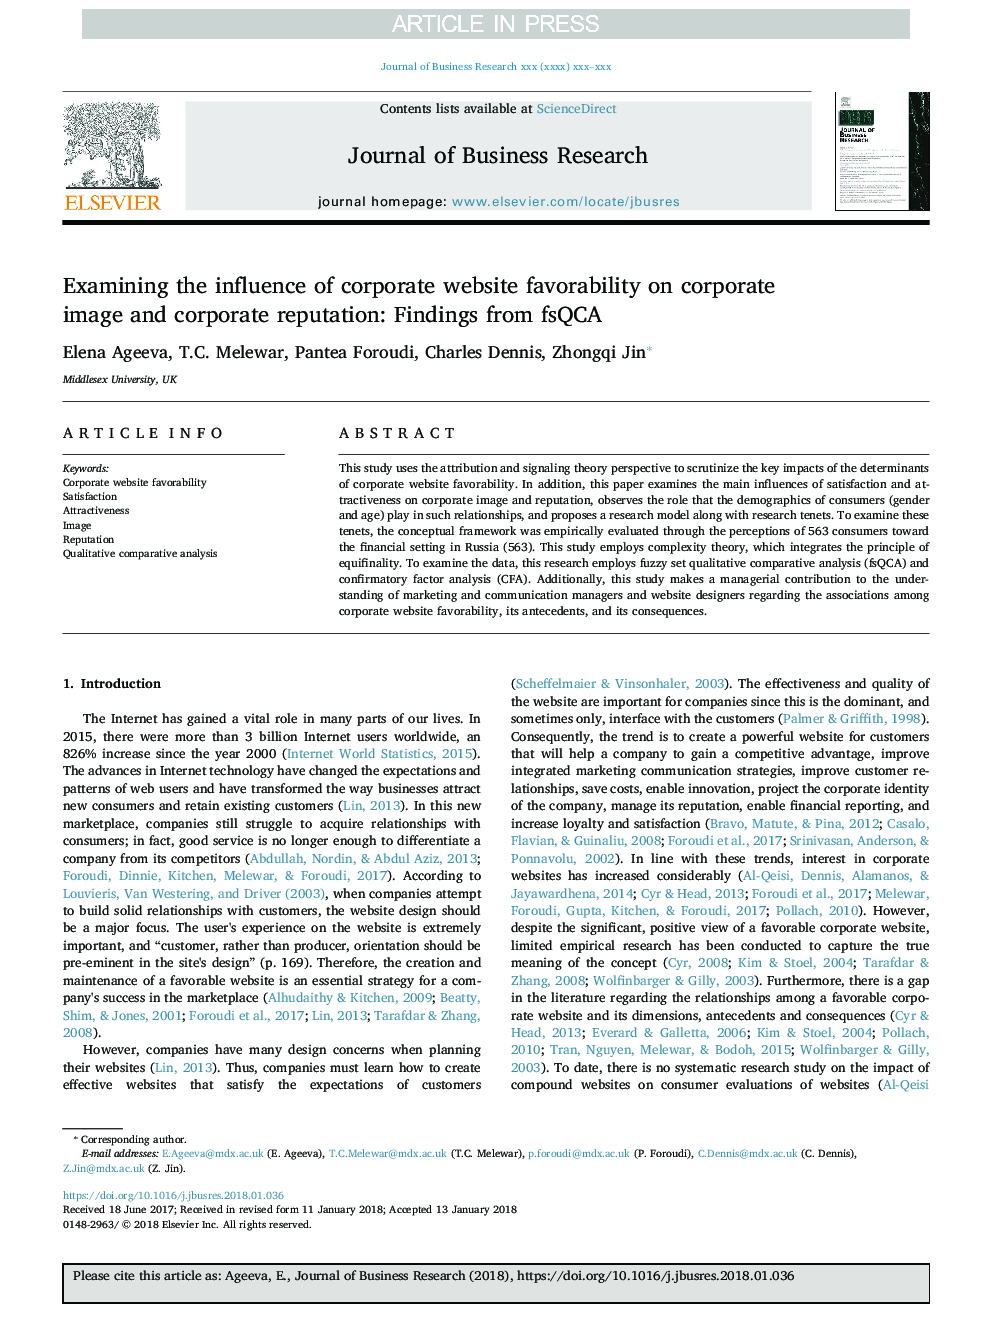 Examining the influence of corporate website favorability on corporate image and corporate reputation: Findings from fsQCA